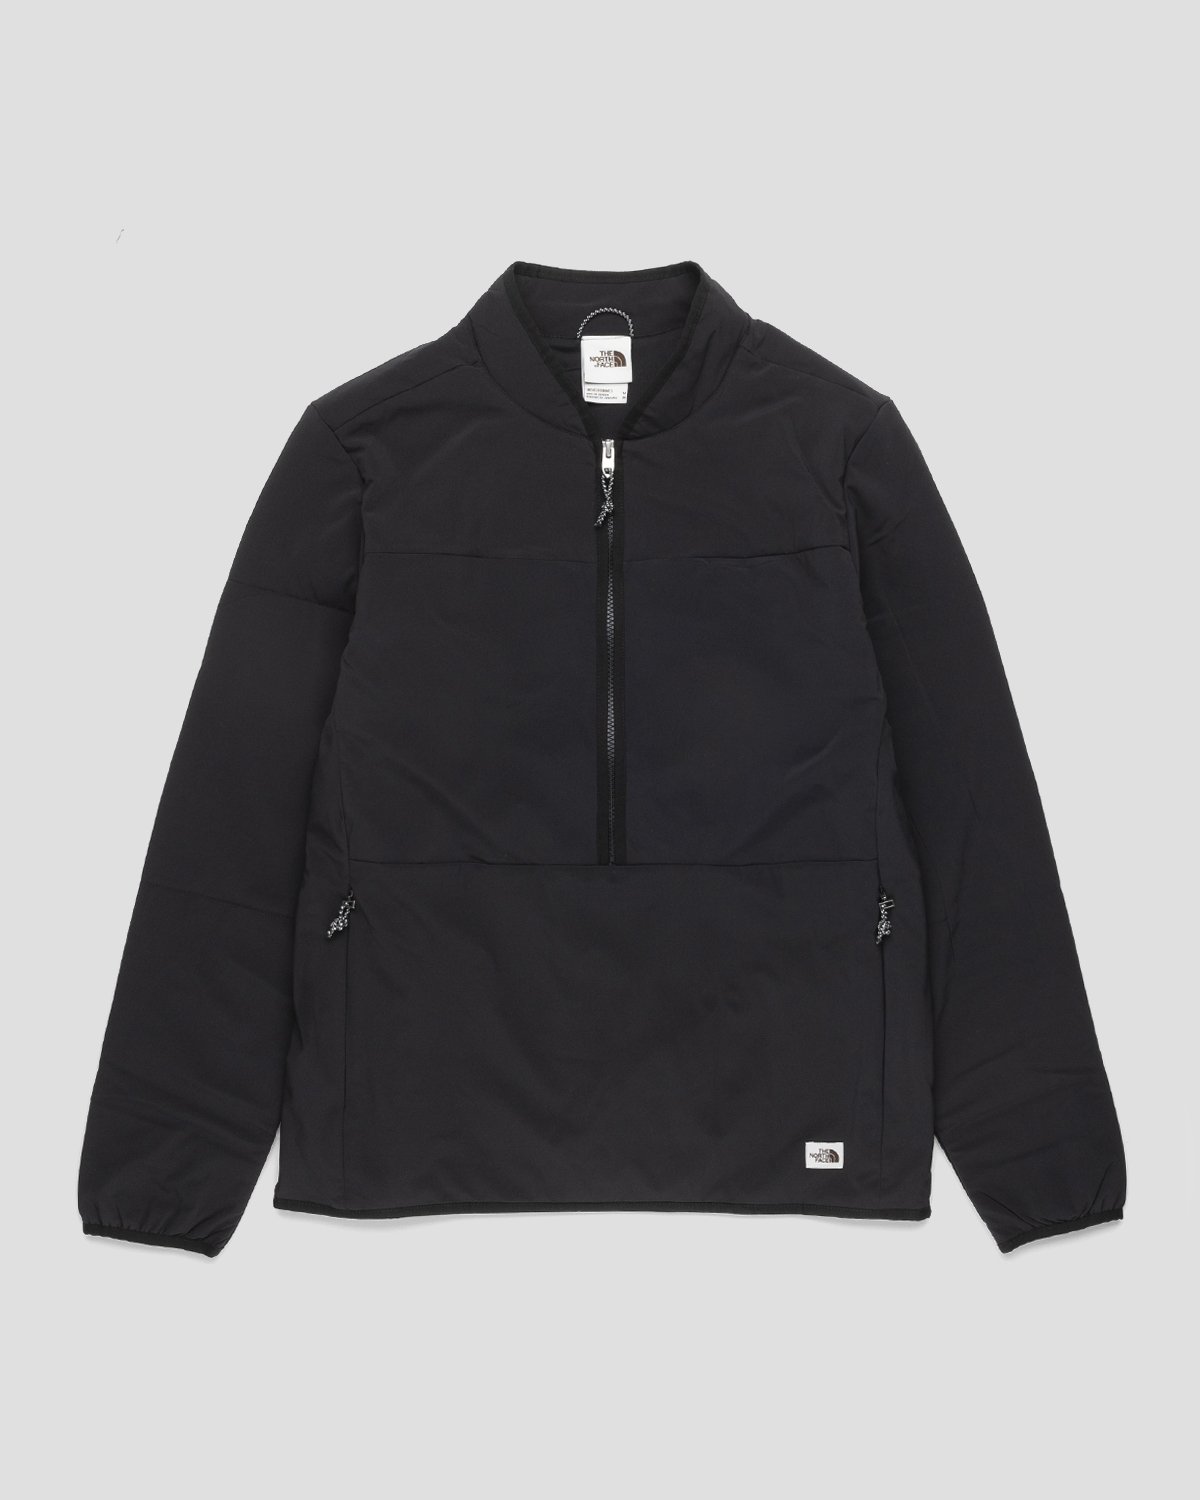 The North Face - Mountain Sweatshirt Pullover Black - Clothing - Black - Image 1